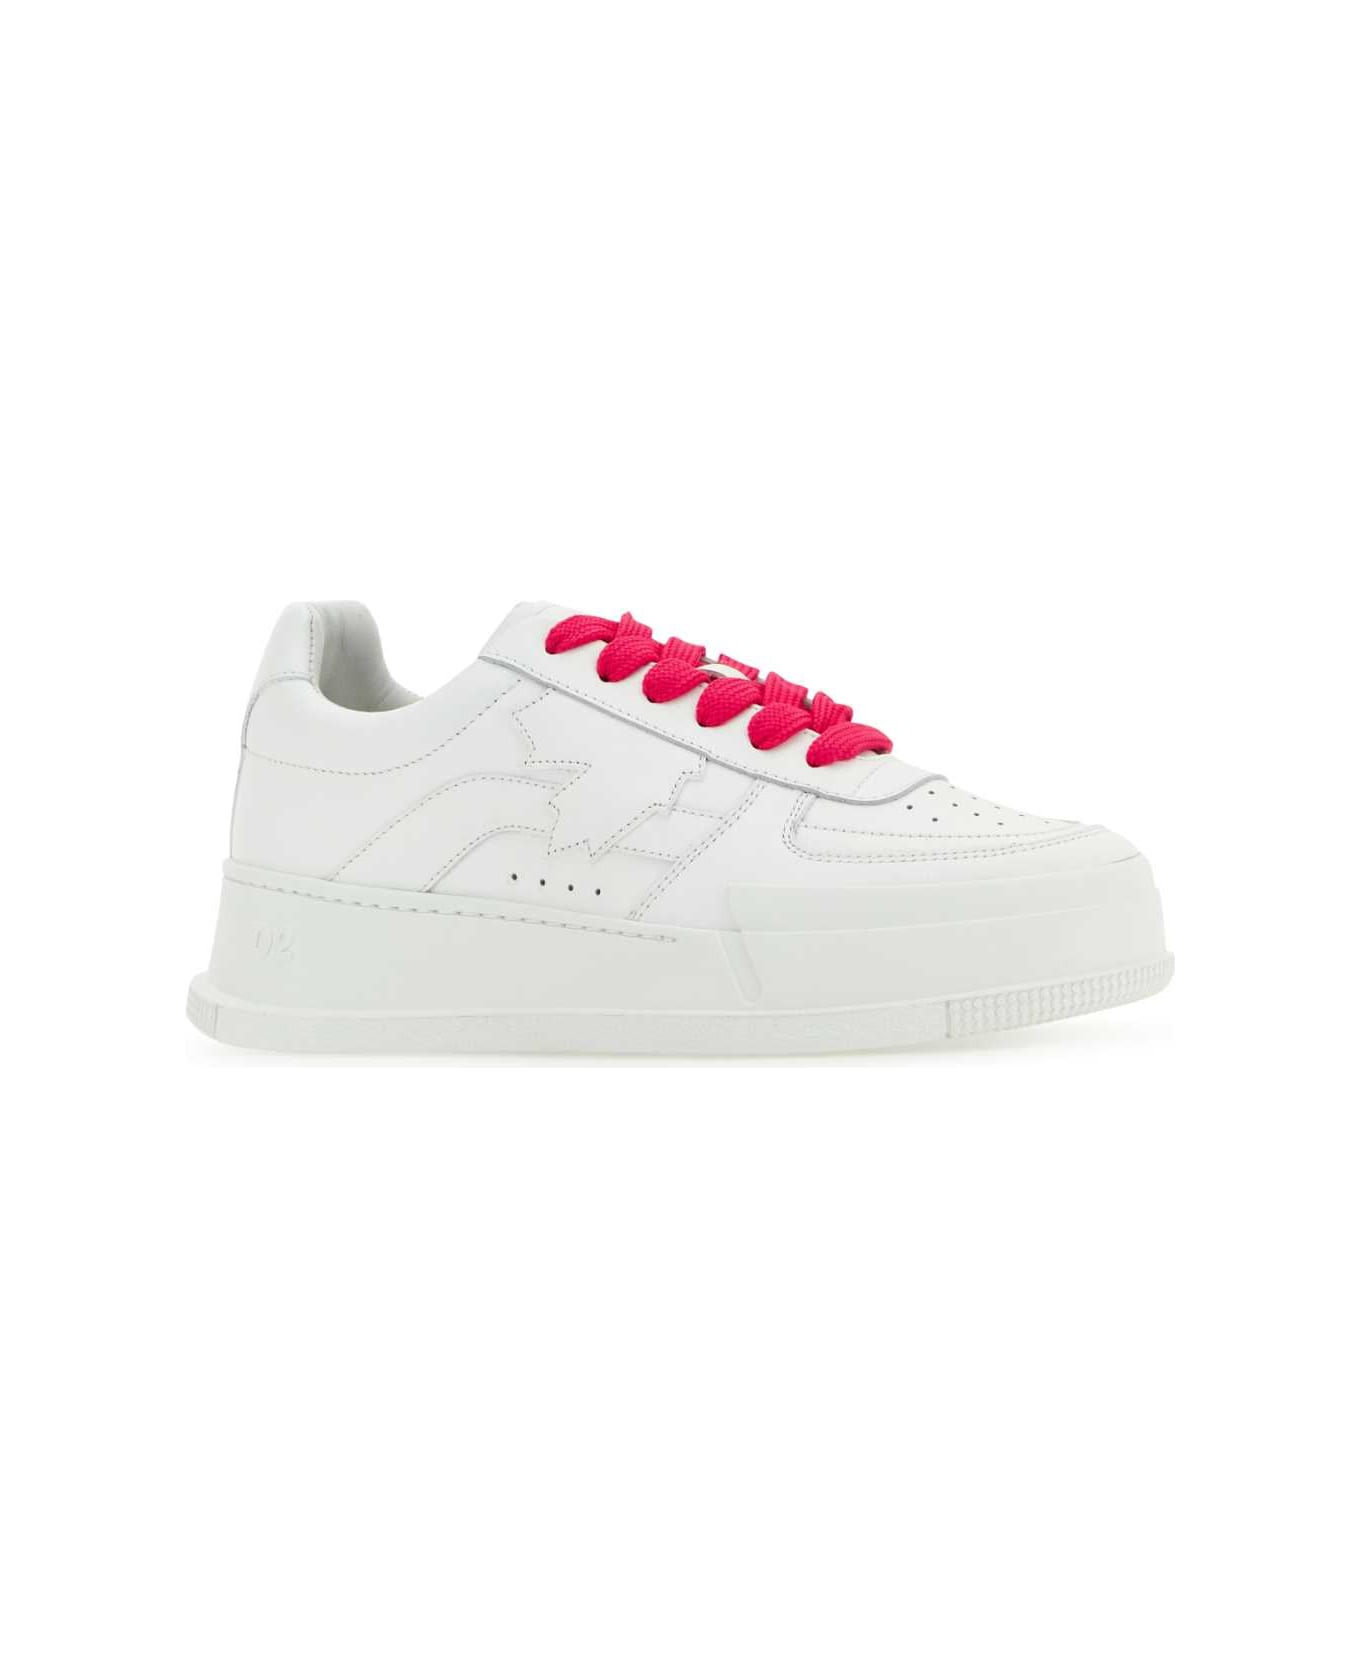 Dsquared2 Canadian Sneakers - WHITEFUXIA スニーカー